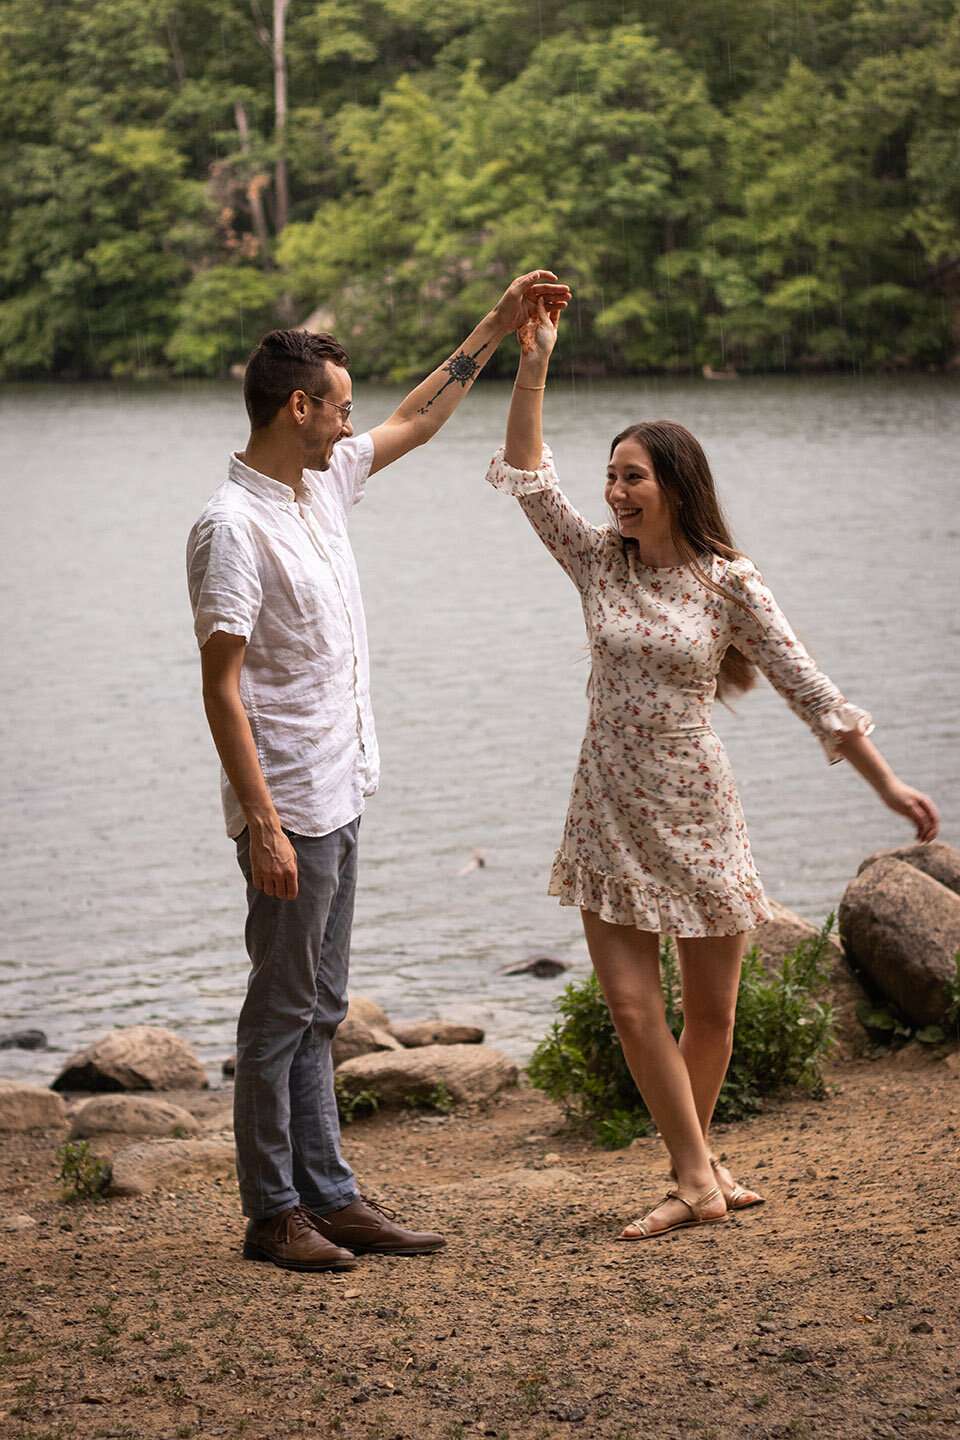 Rustic outdoor wooded engagement photos by jaimee rae photography